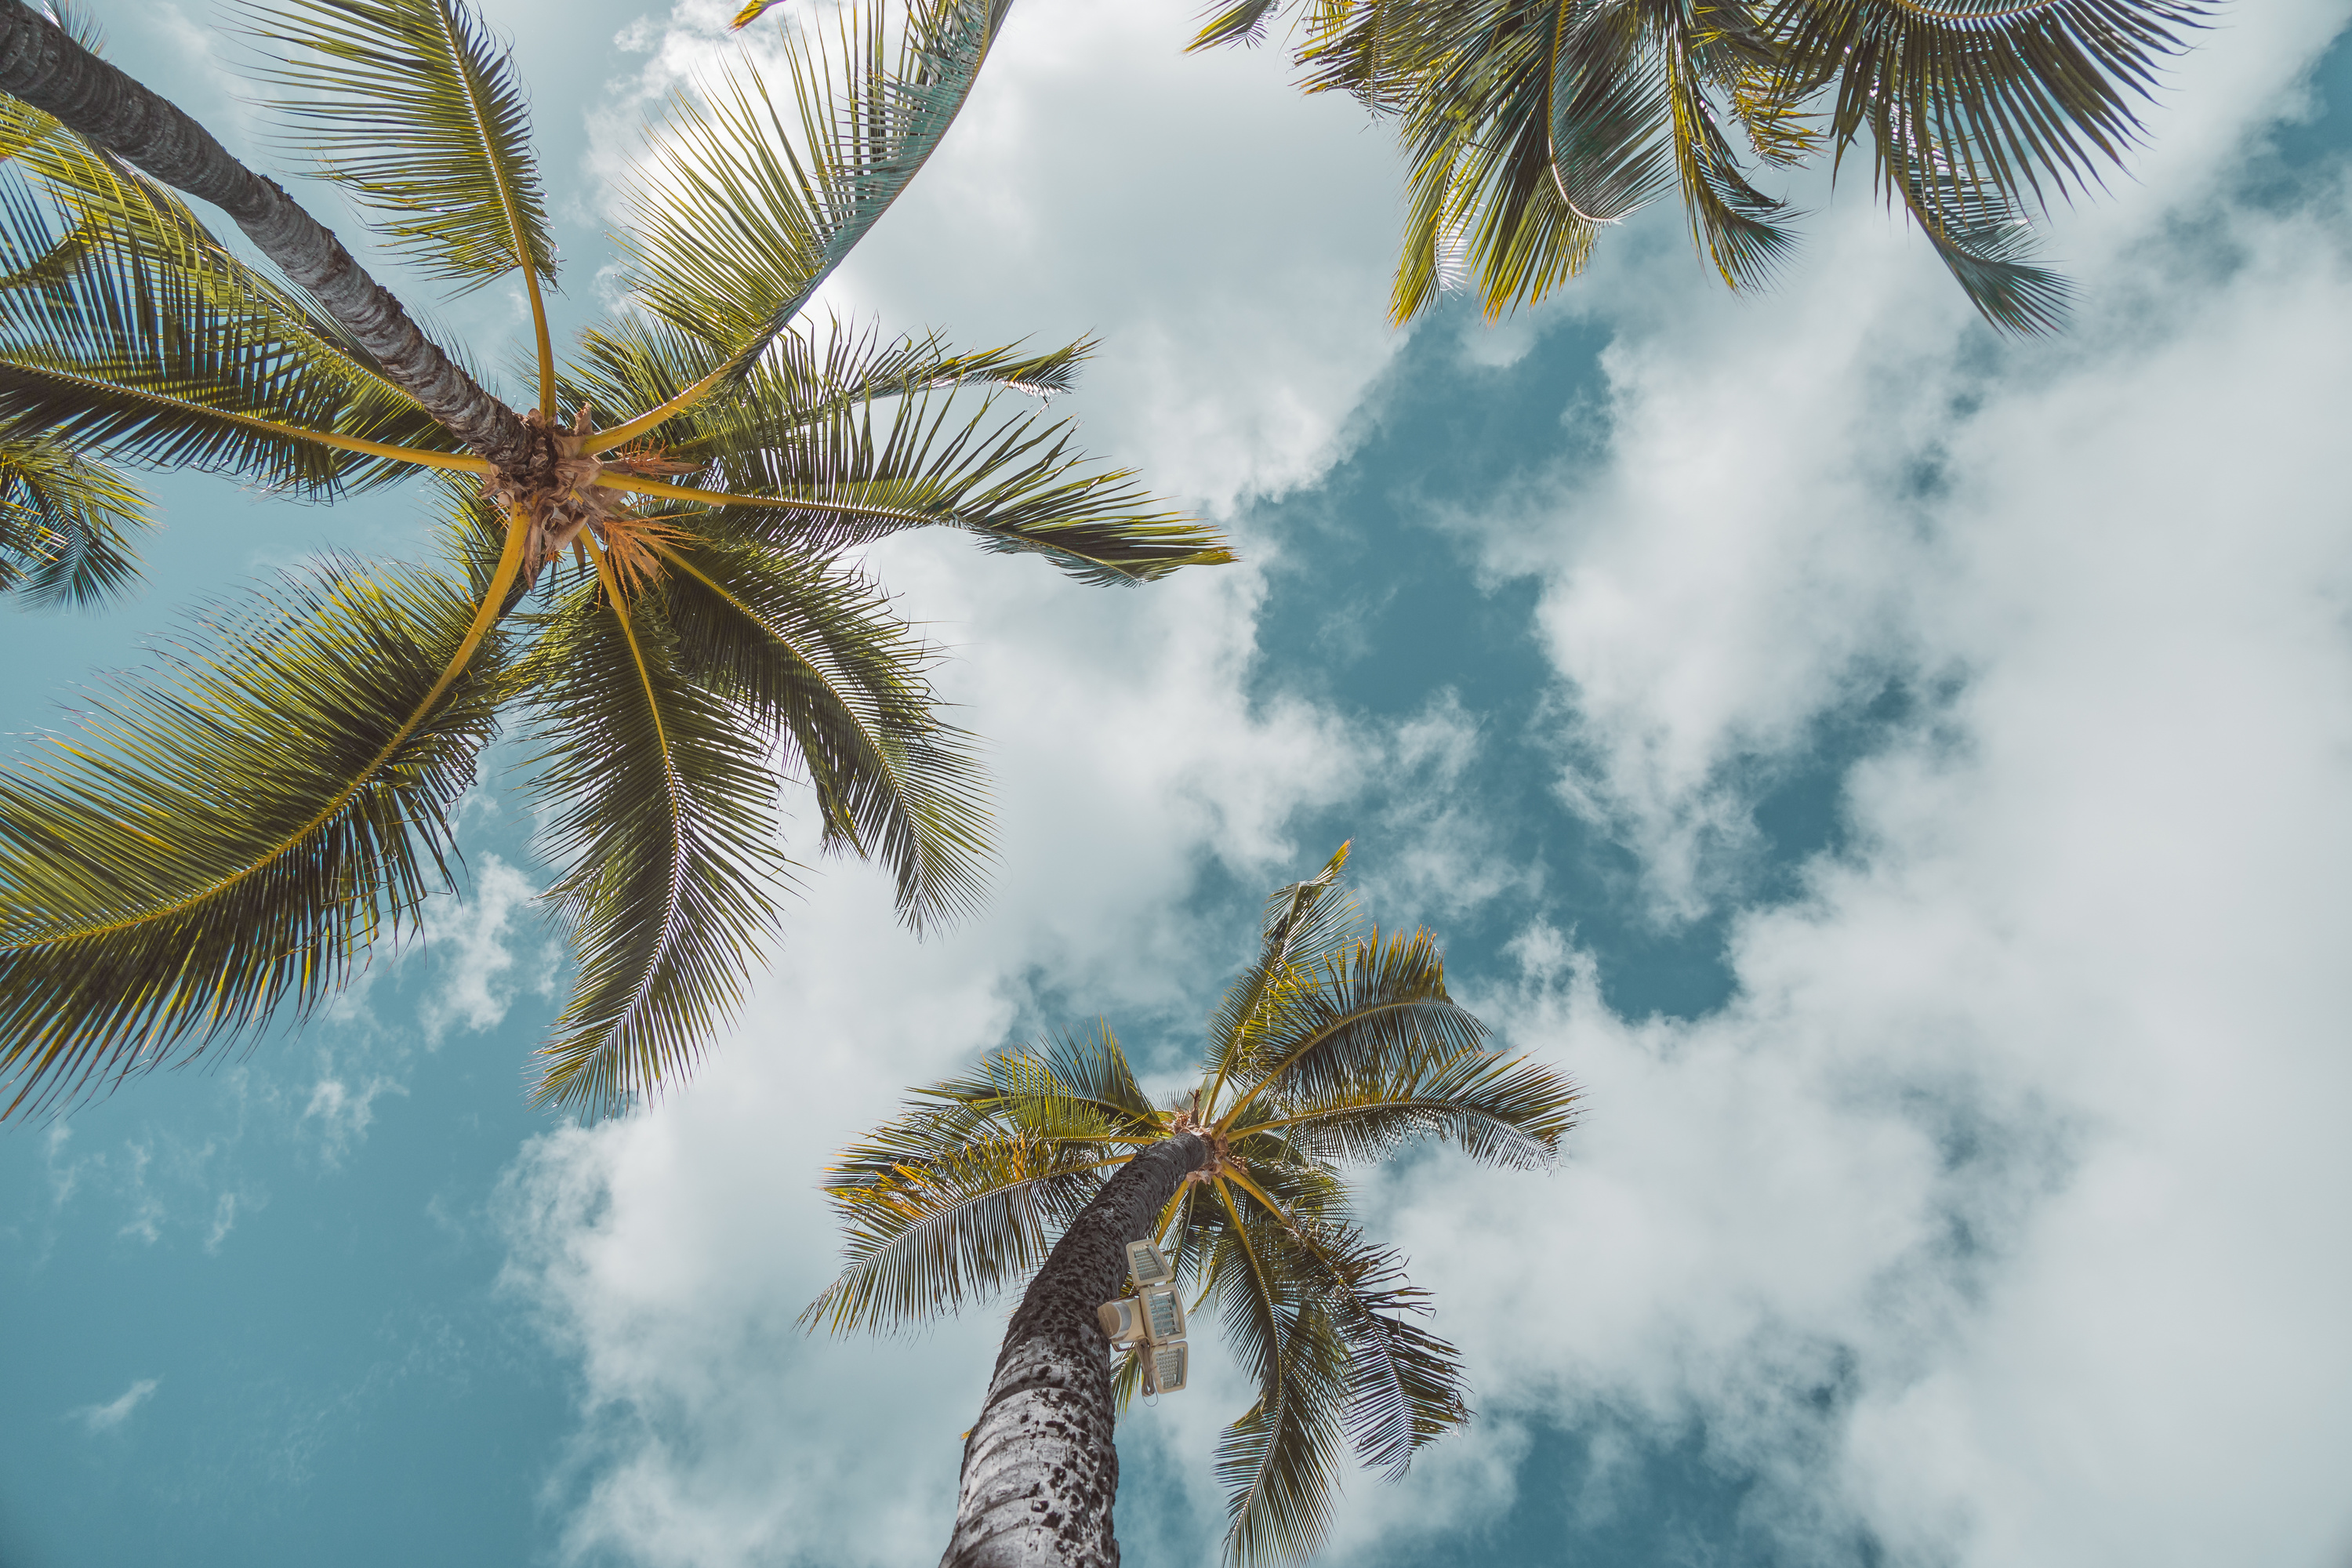 Green Palm Tree Under Blue Sky and White Clouds